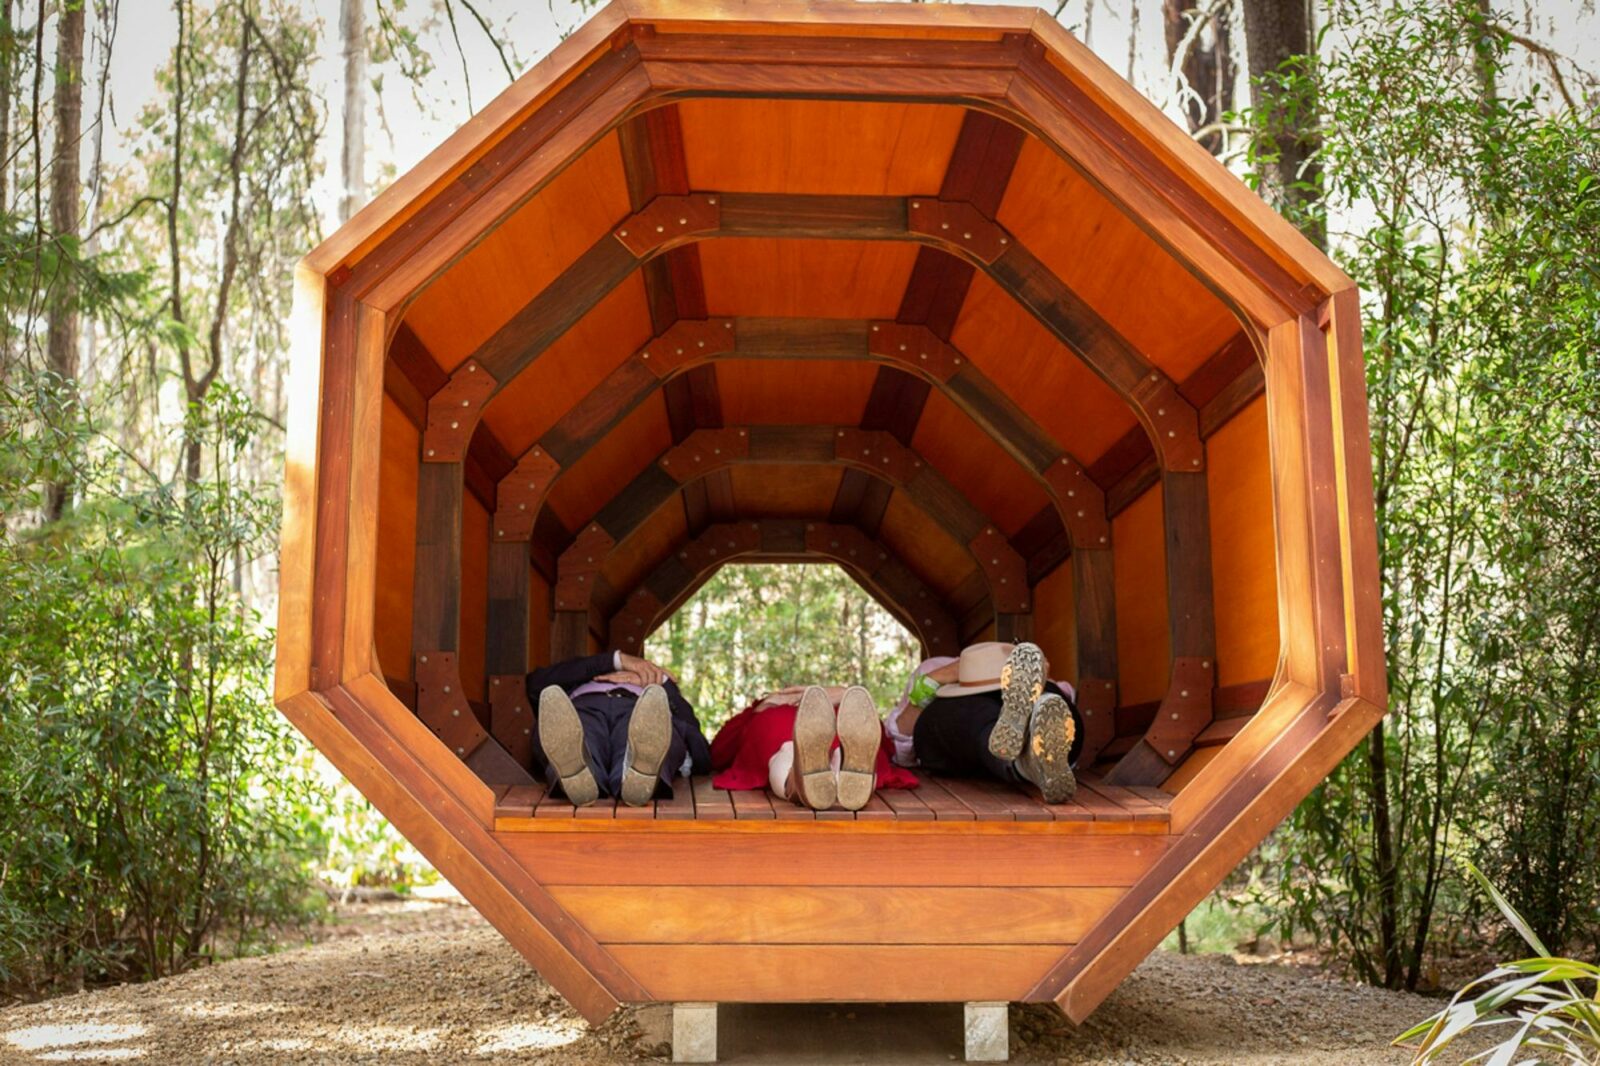 Three pairs of feet are visible in the Sound Pod on the Wellness Walk in Bago State Forest